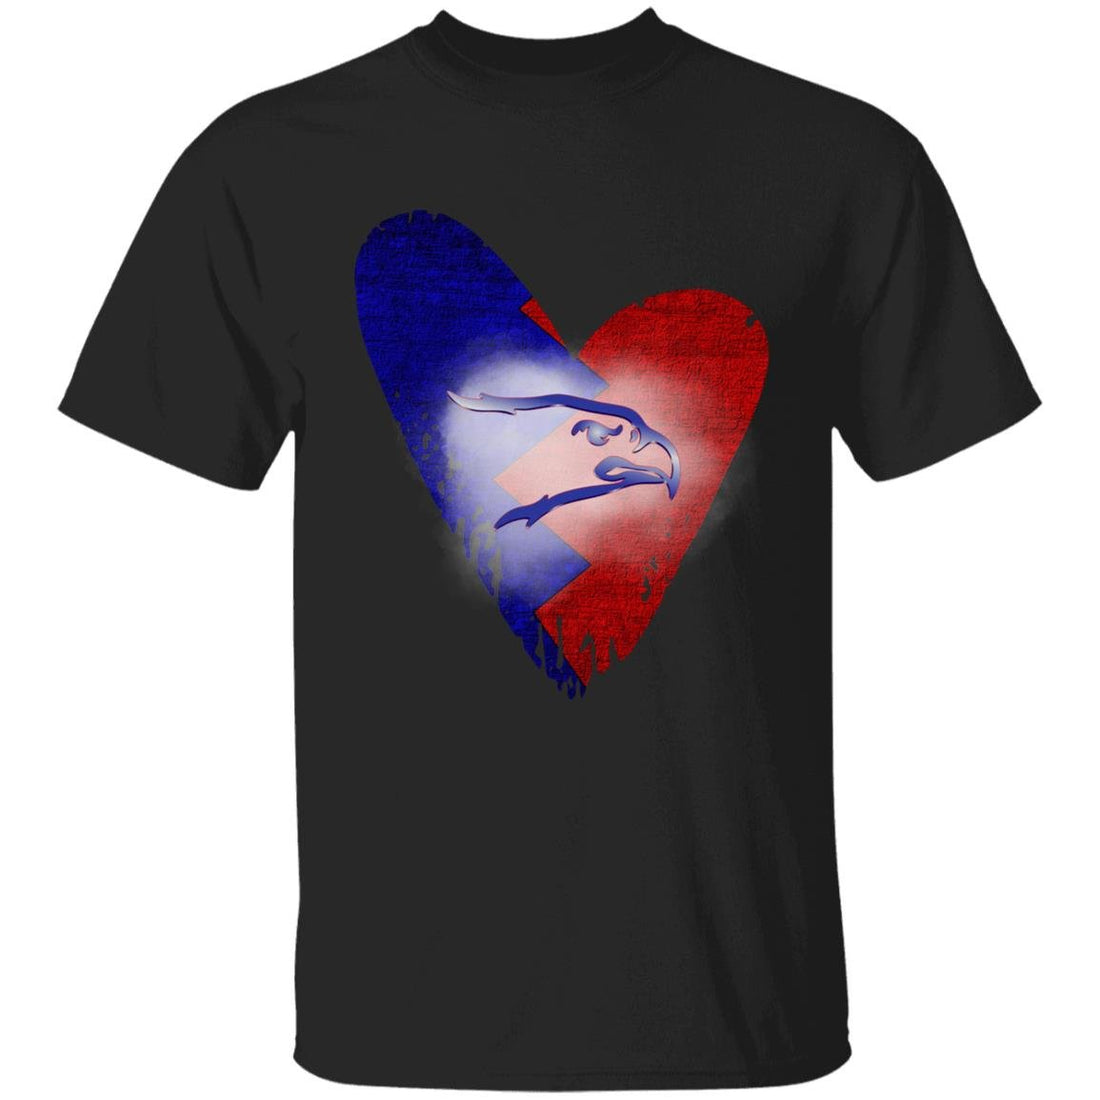 Eagle Love Youth T-Shirt - T-Shirts - Positively Sassy - Eagle Love Youth T-Shirt